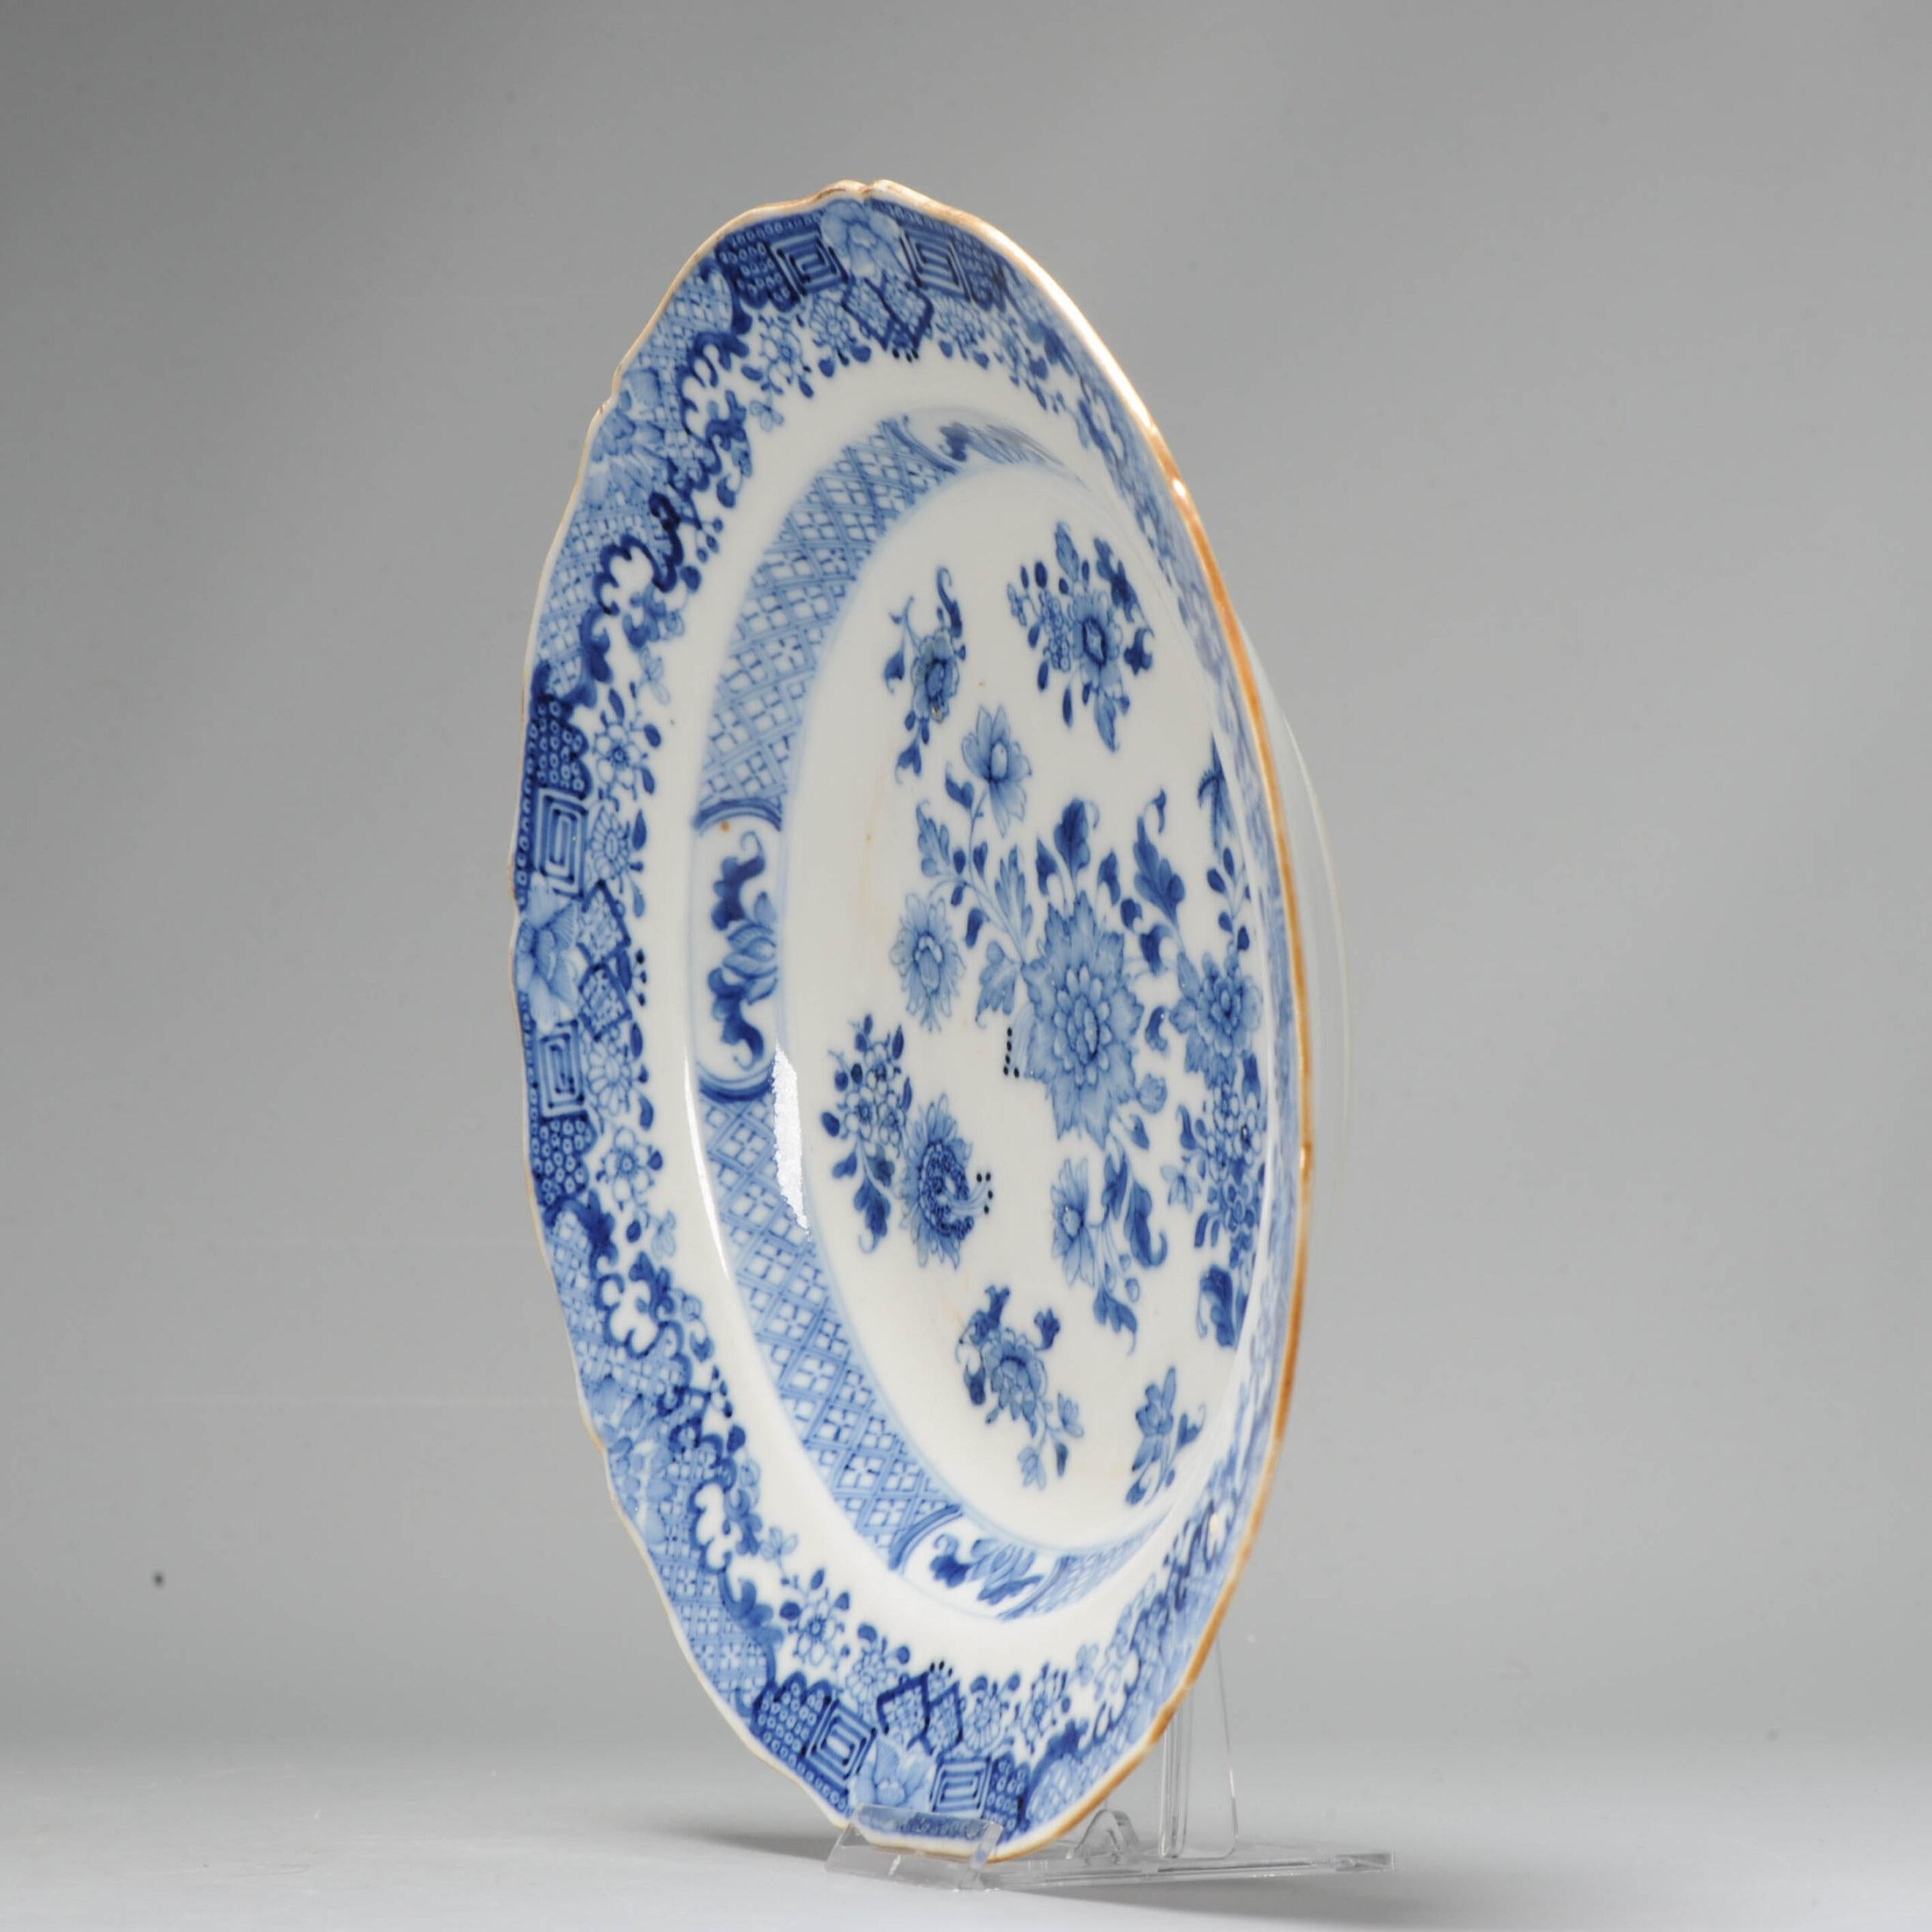 Superb quality piece from the Qianlong period.

High quality scene of a garden scene.

Additional information:
Material: Porcelain & Pottery
Type: Plates
Color: Blue & White
Region of Origin: China
Emperor: Qianlong (1735-1796)
Period: 18th century